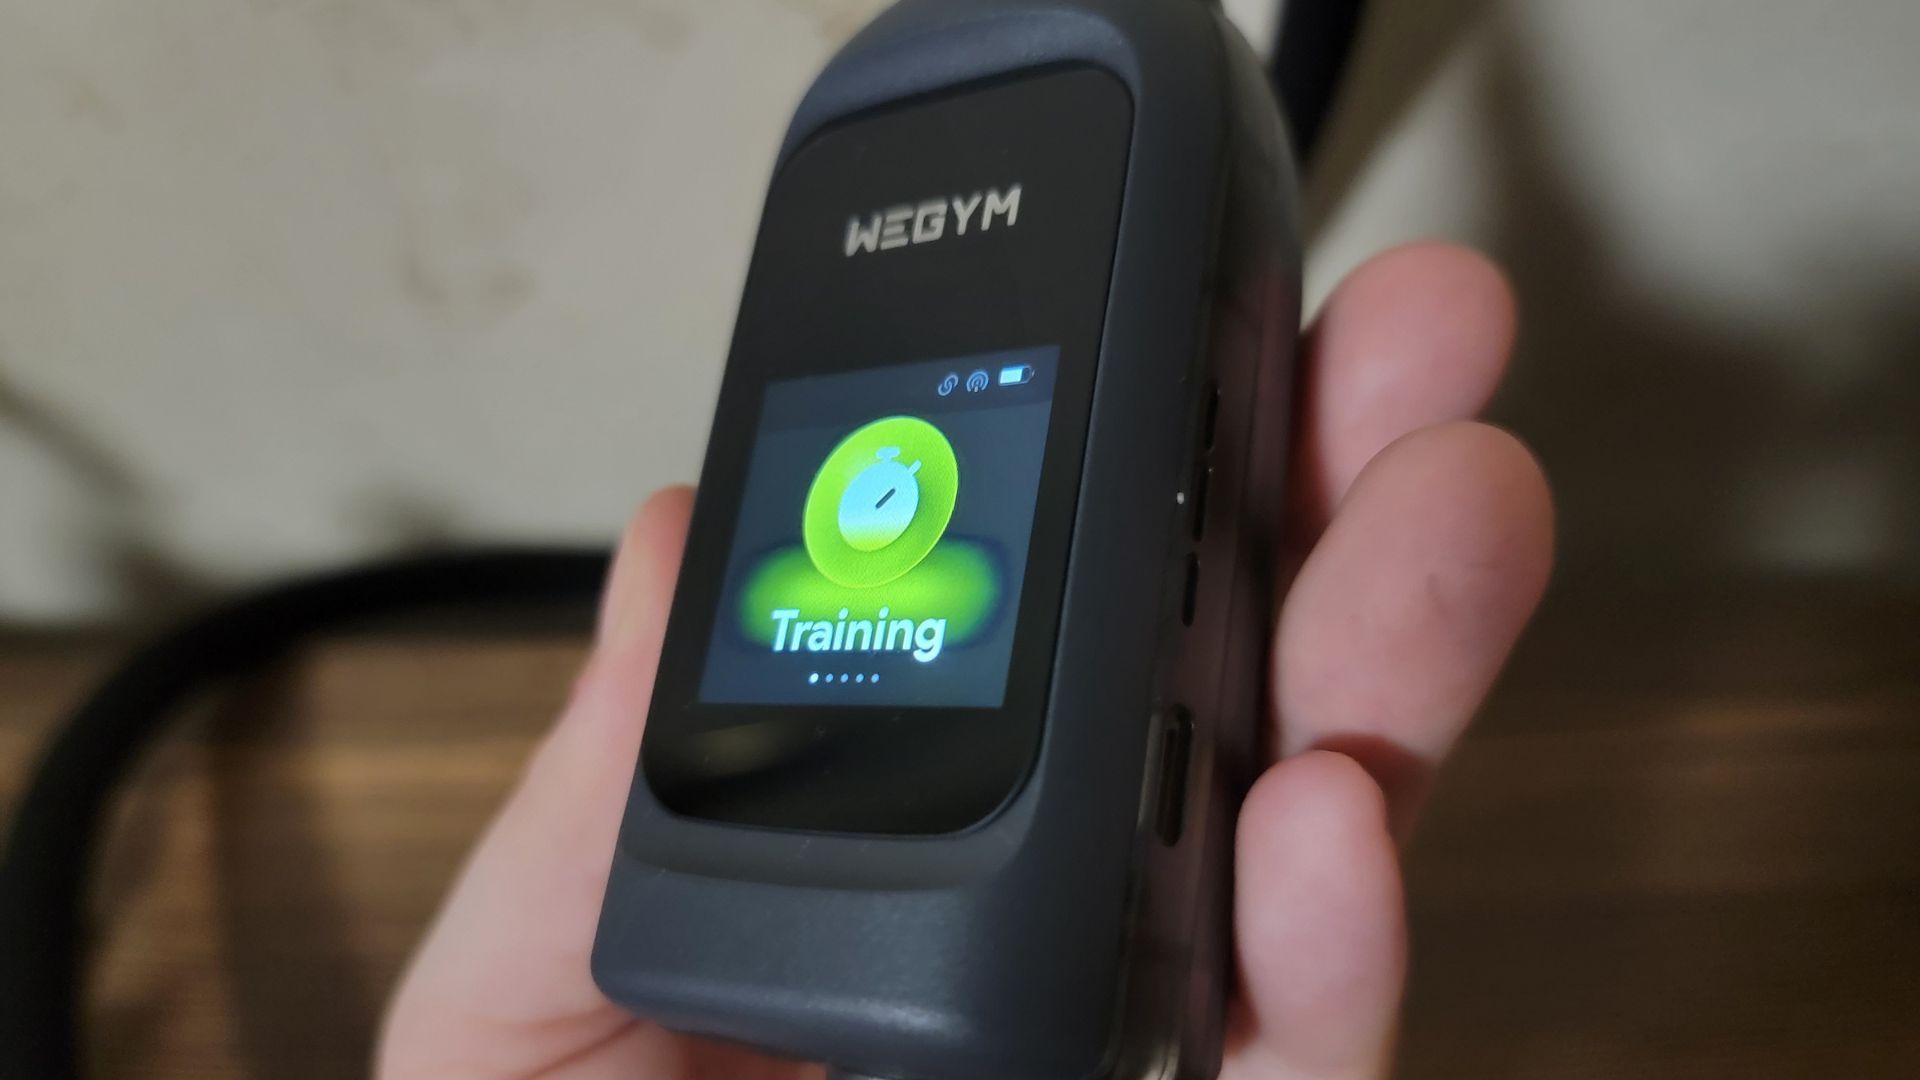 WEGYM Rally X3 Pro review: a data-rich exercise routine